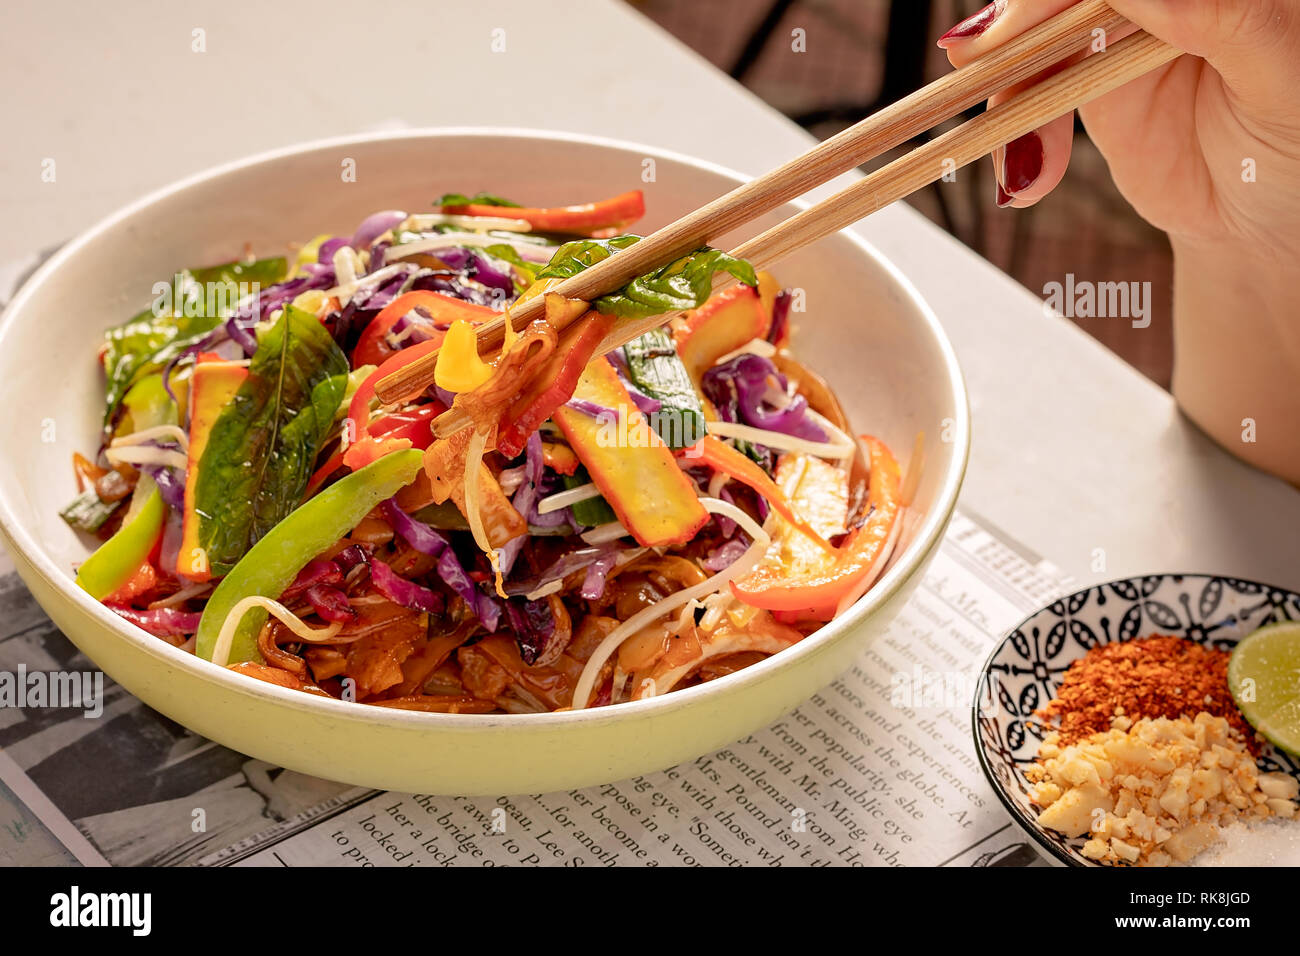 Taking a bit from the ready Thai dish using chopsticks Stock Photo